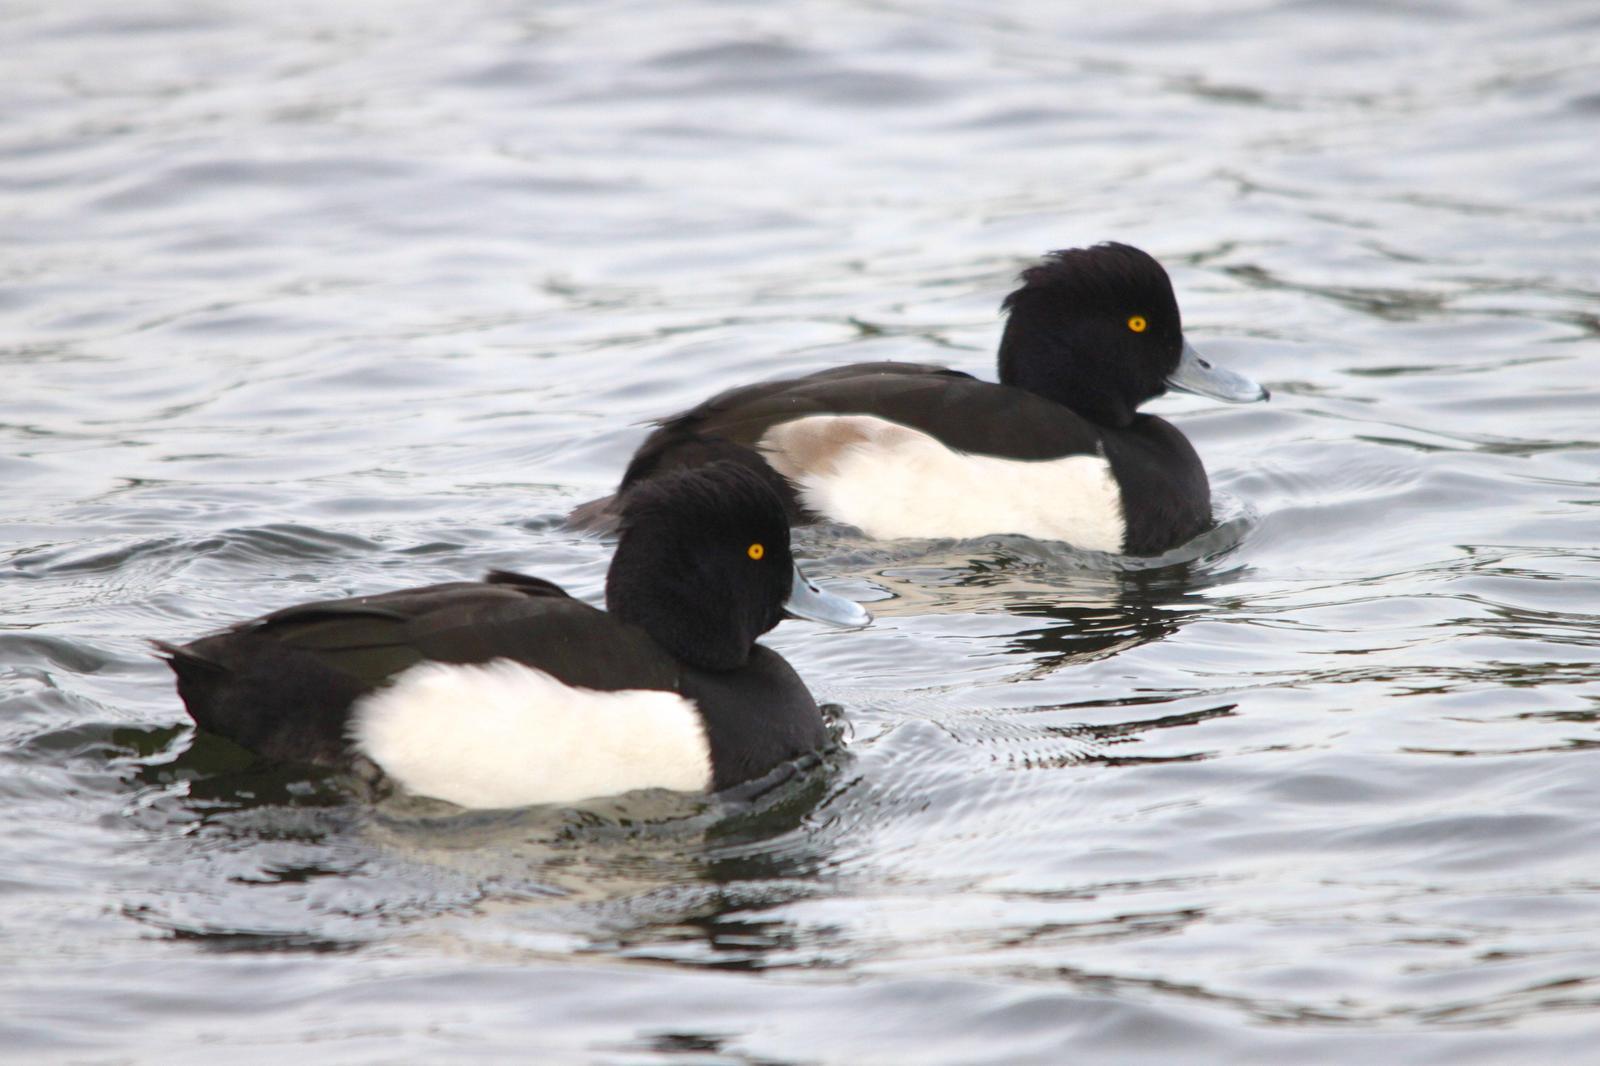 Tufted Duck Photo by Tom Ford-Hutchinson